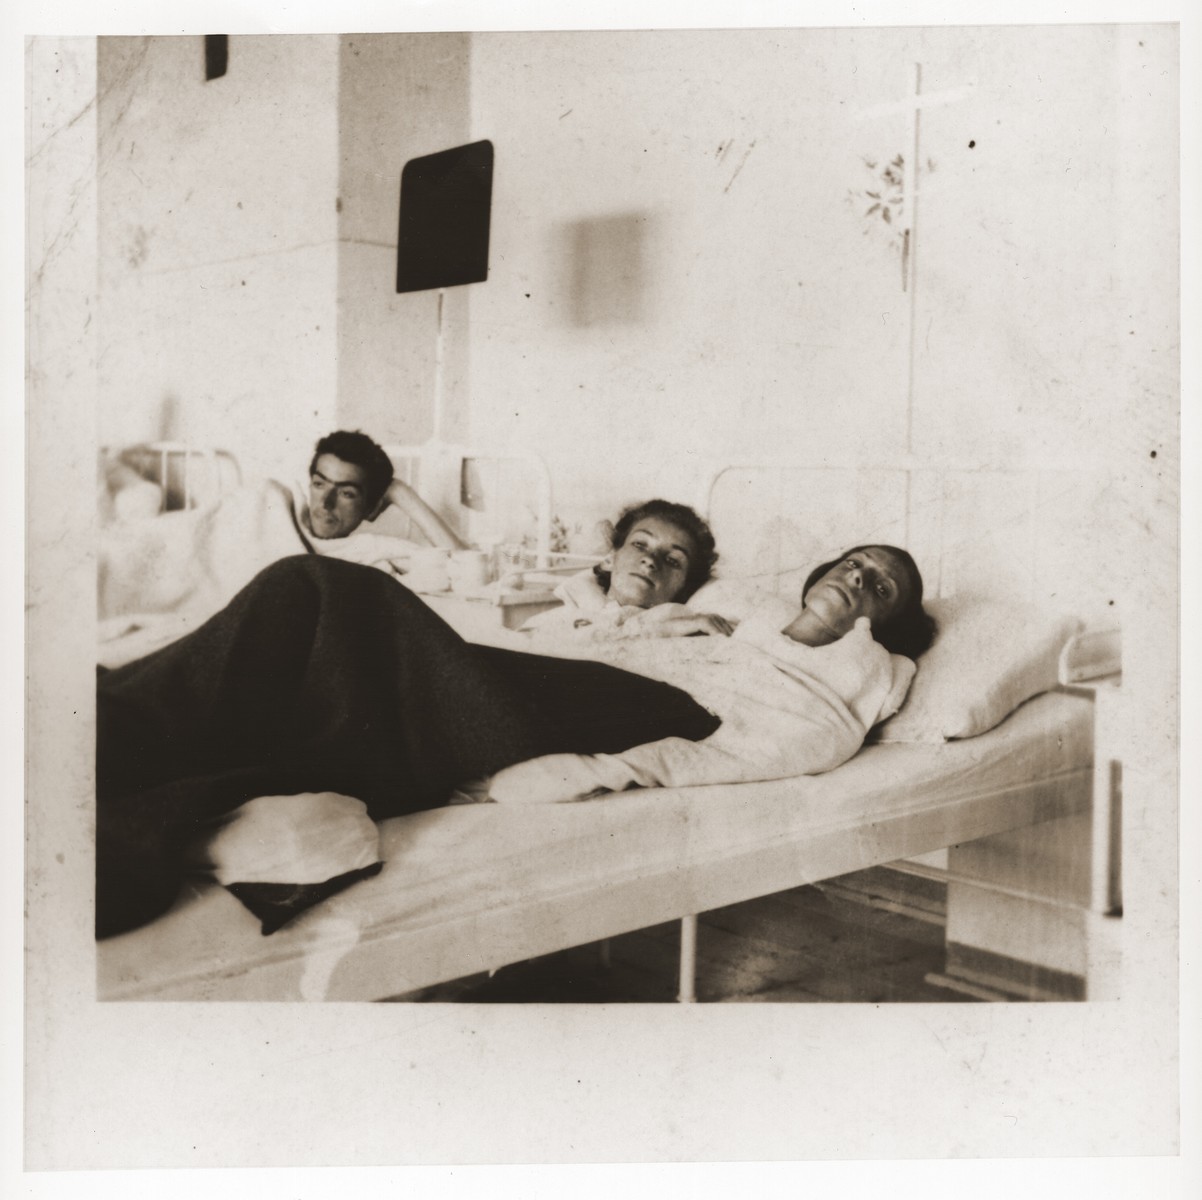 Three Jewish women in a hospital provided by American troops.  The women are survivors of a death march from Helmbrechts that ended in Volary.

Among those pictured is Rozia Epsztajn (center).